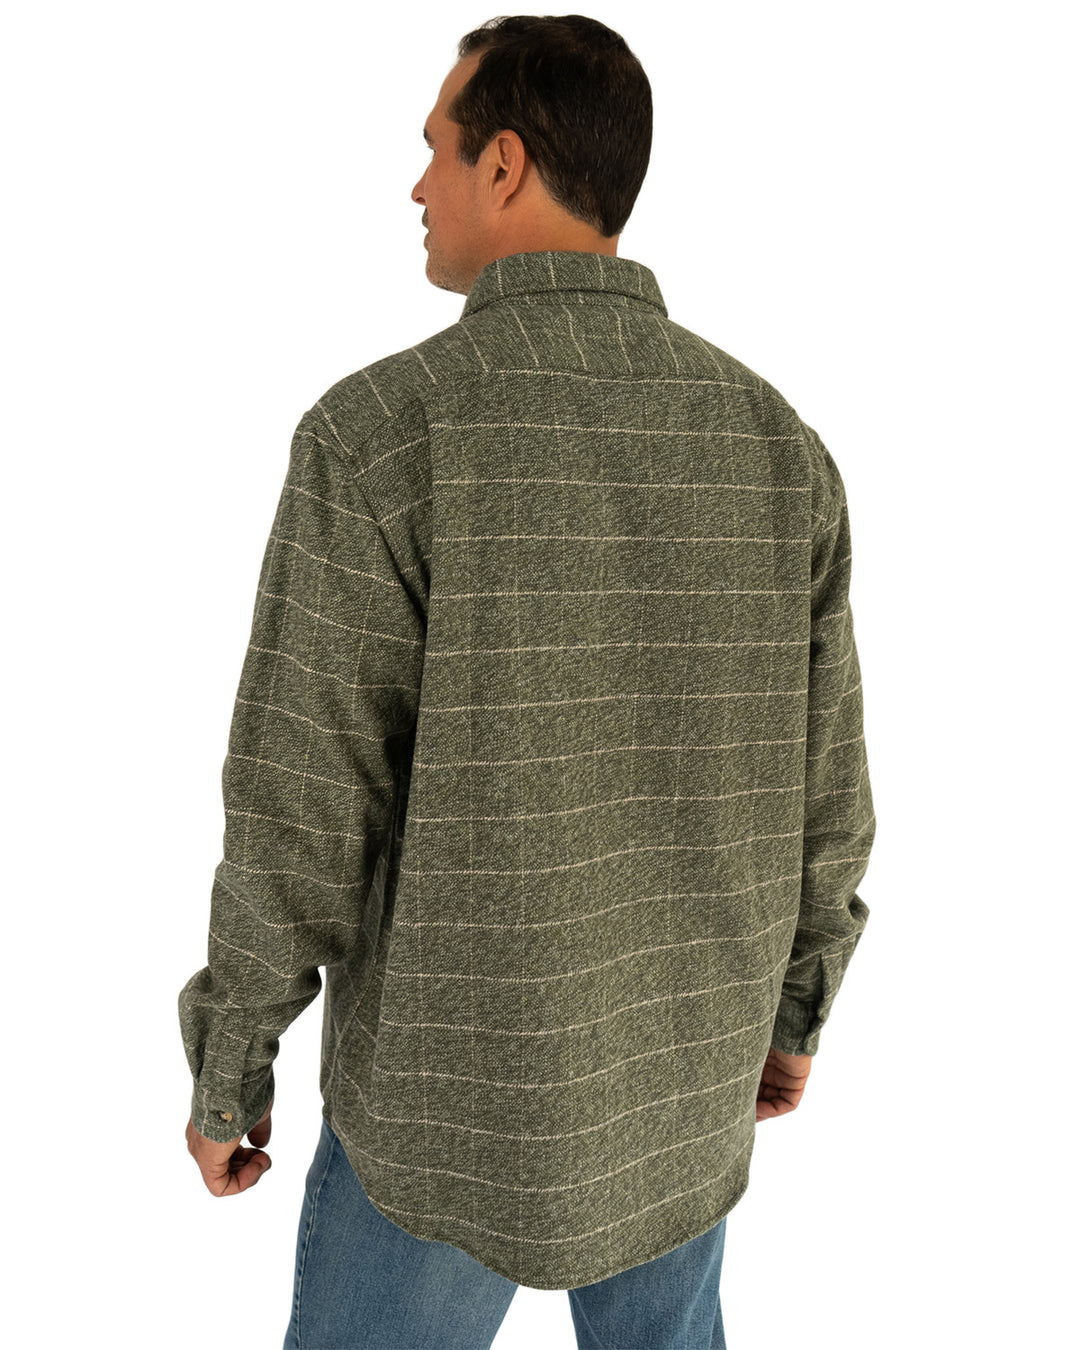 Relaxed fitting flannel shirt in Moss Green by MuskOx Flannels for Men